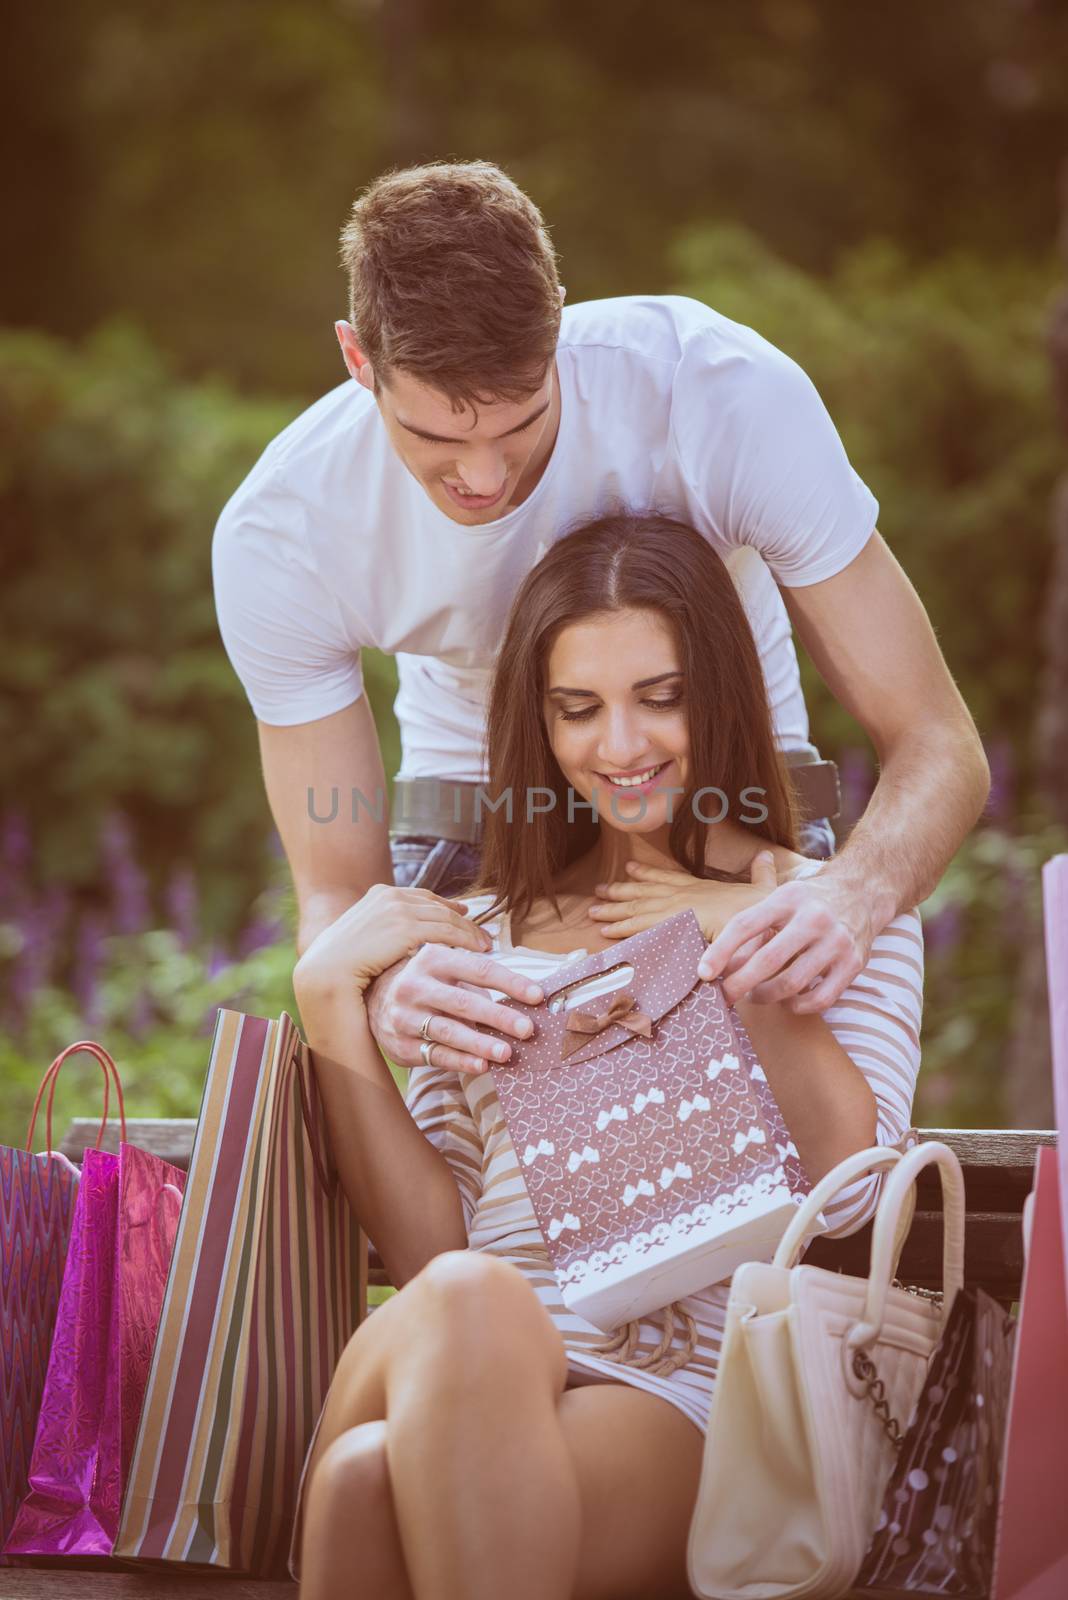 A young girl sitting on a park bench enjoying the beautiful sunny day, resting from shopping in addition to a bunch of shopping bags, her boyfriend holding a gift bag  and behind the bench leaning toward her face.